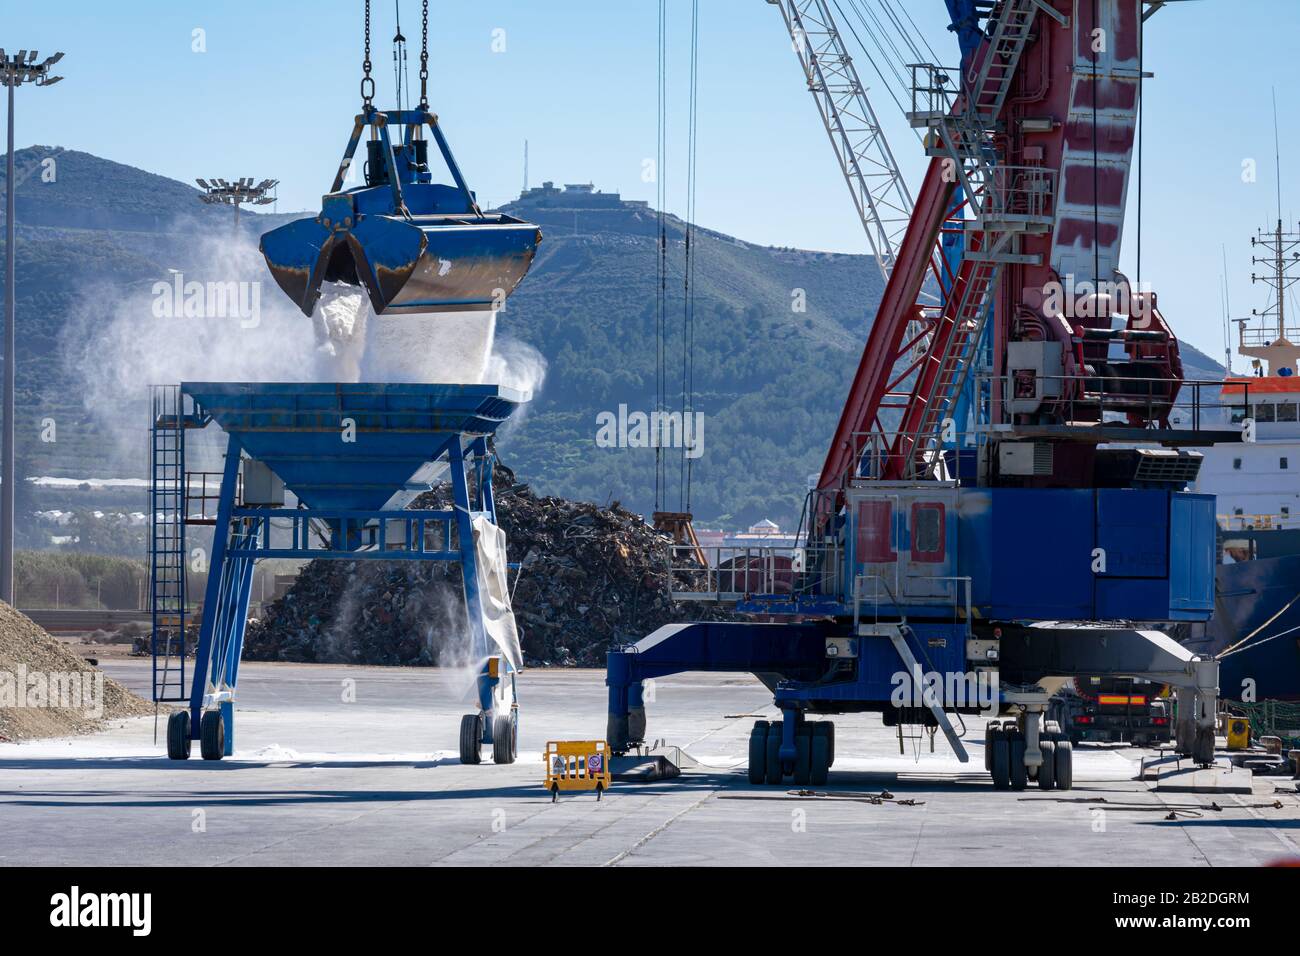 Crane in the port unloading a ship carrying fertilizer Stock Photo